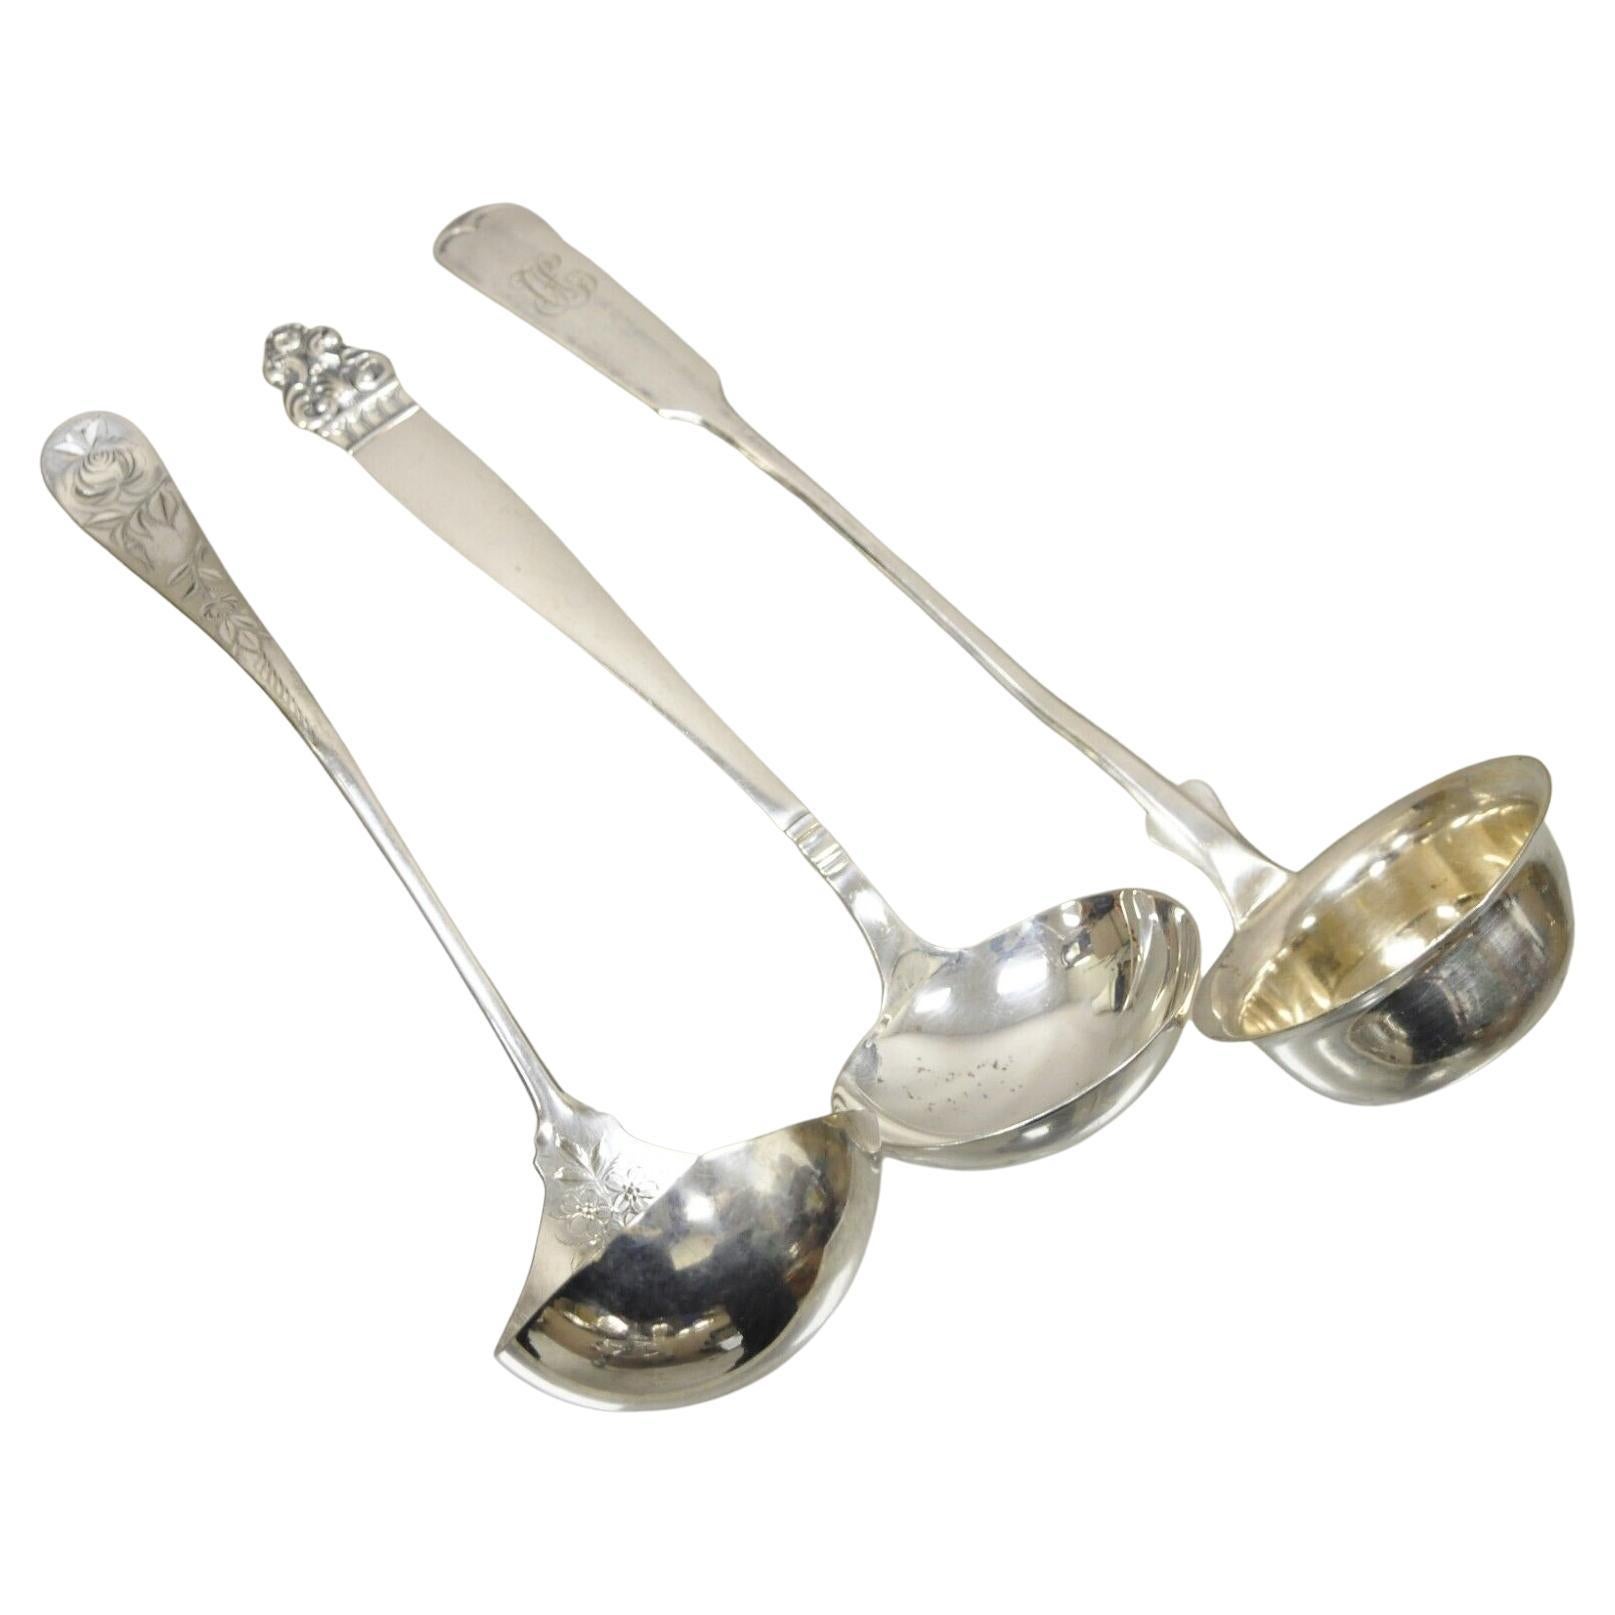 Antique Silver Plated Soup Spoon Ladles TH Marthinsen Holmes Edwards, 3 Pieces For Sale